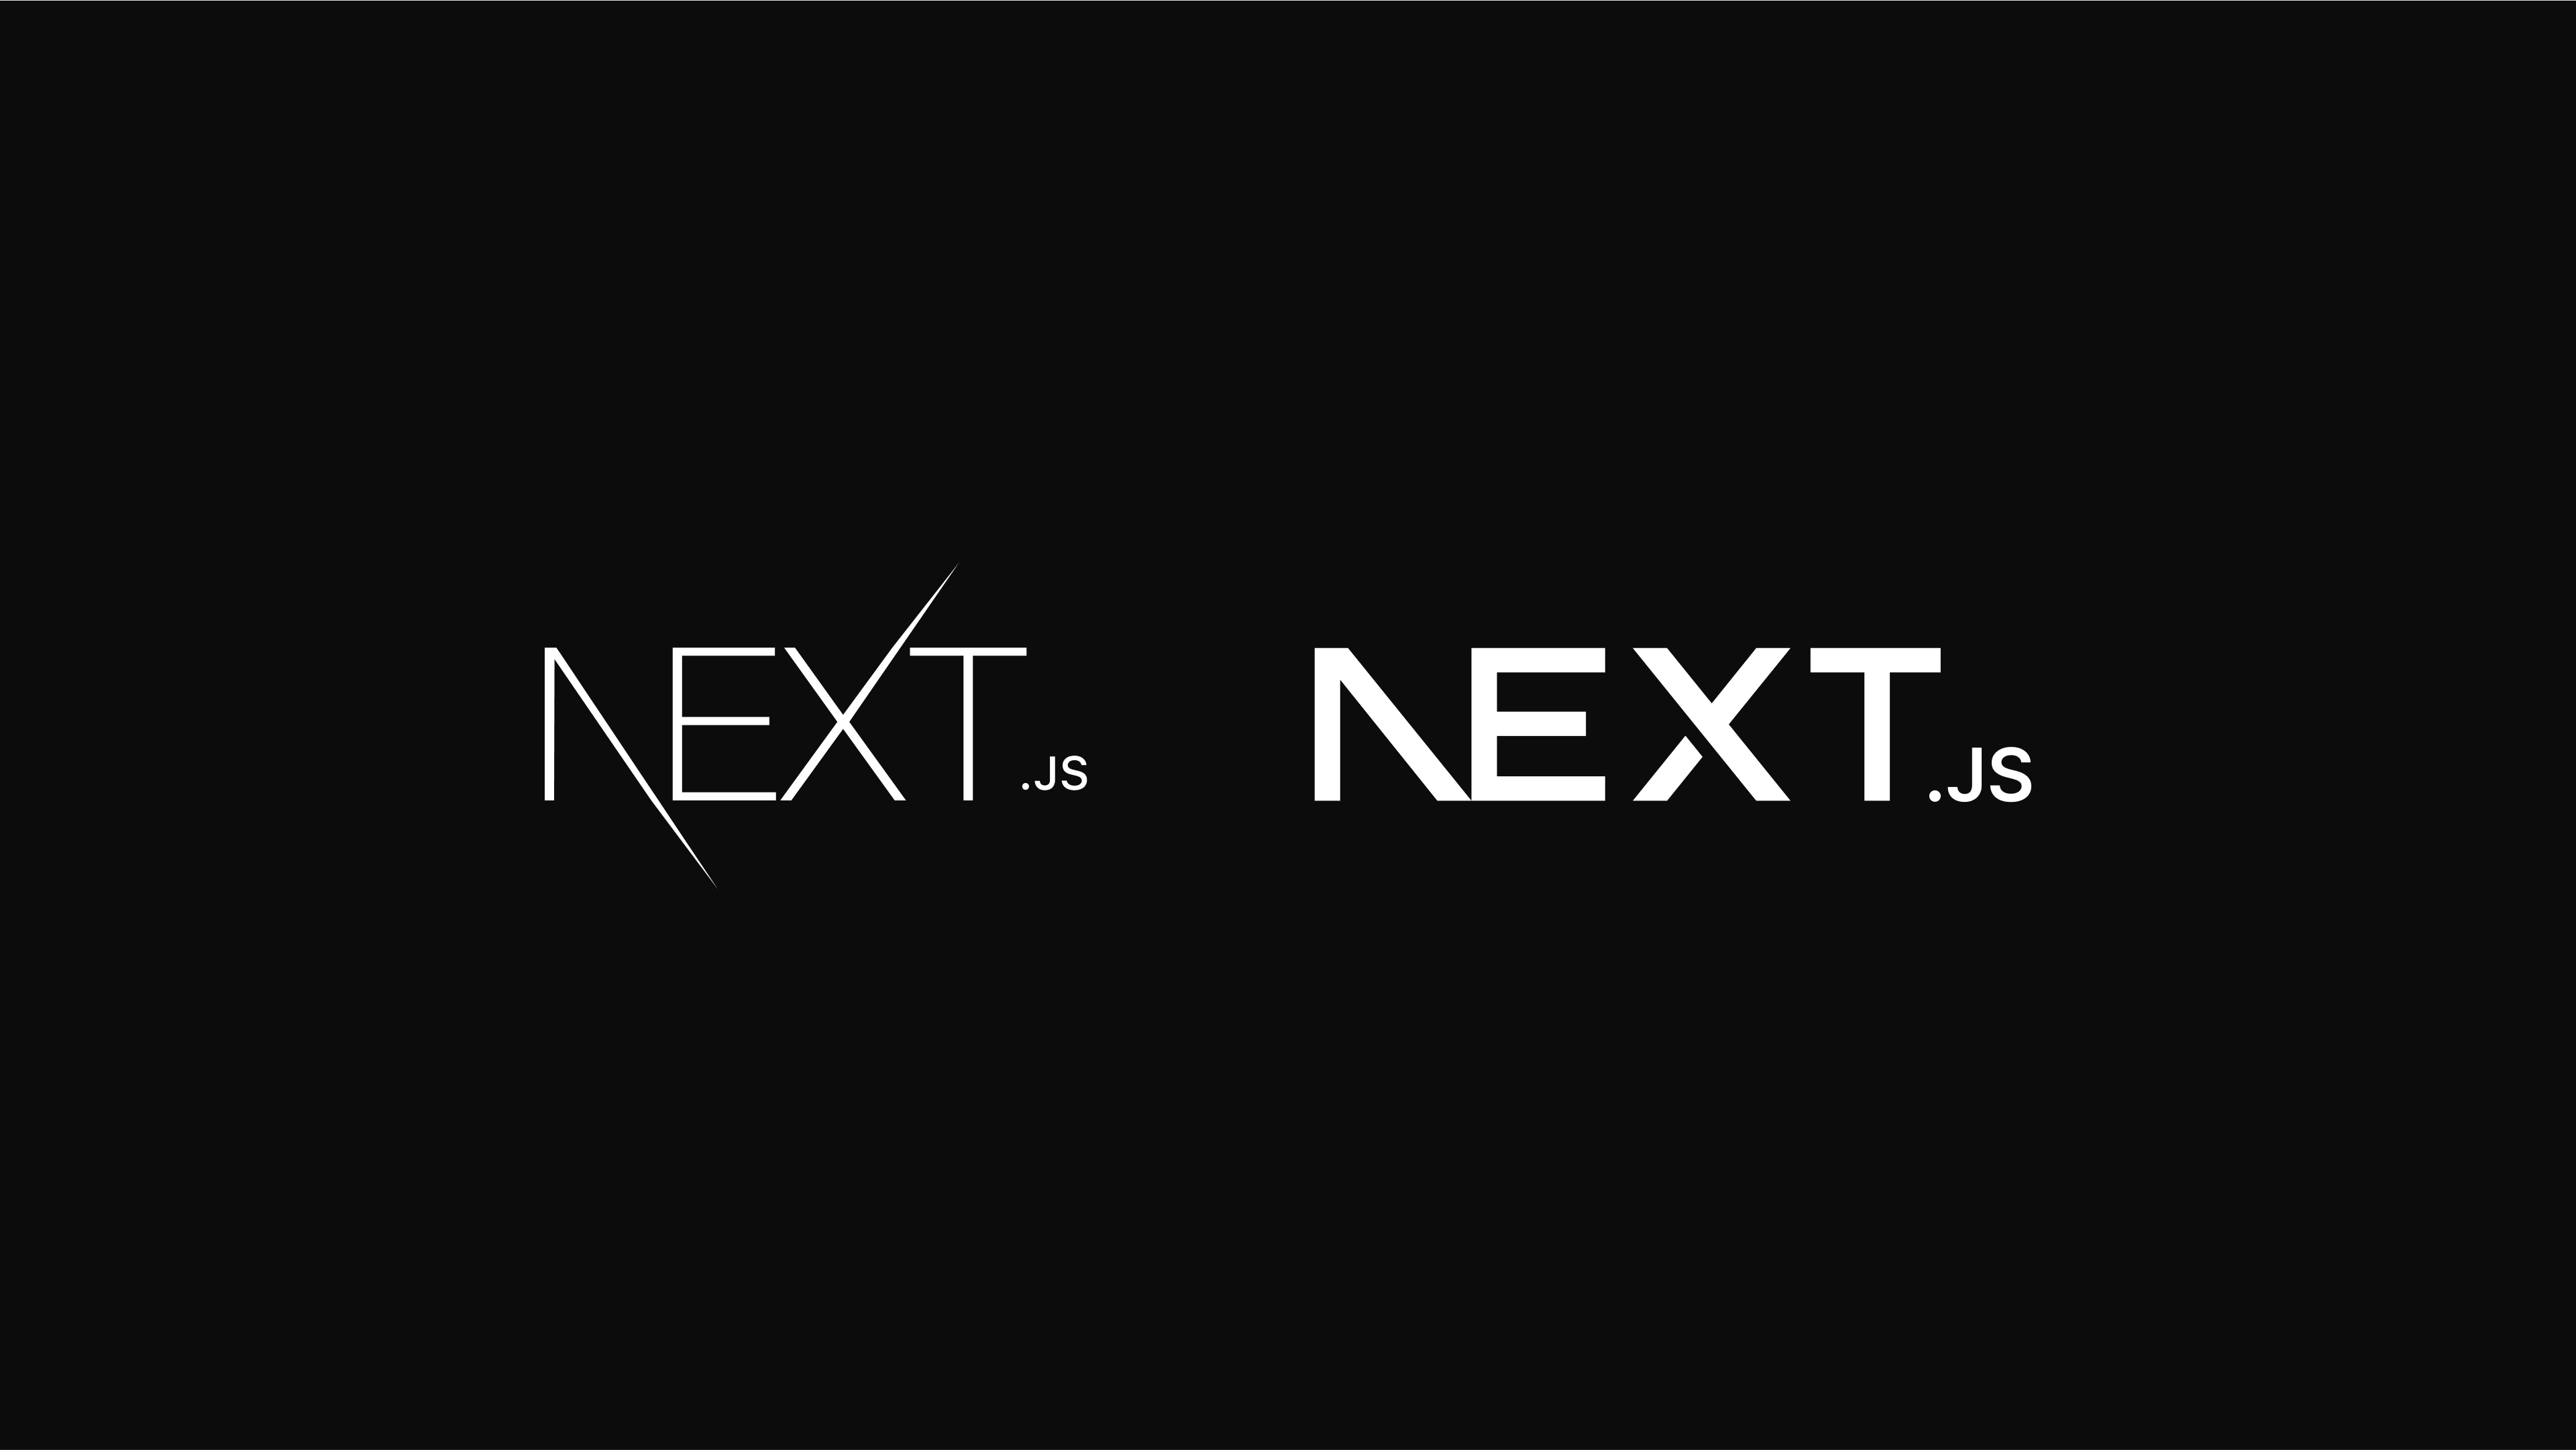 Next.js logo before and after